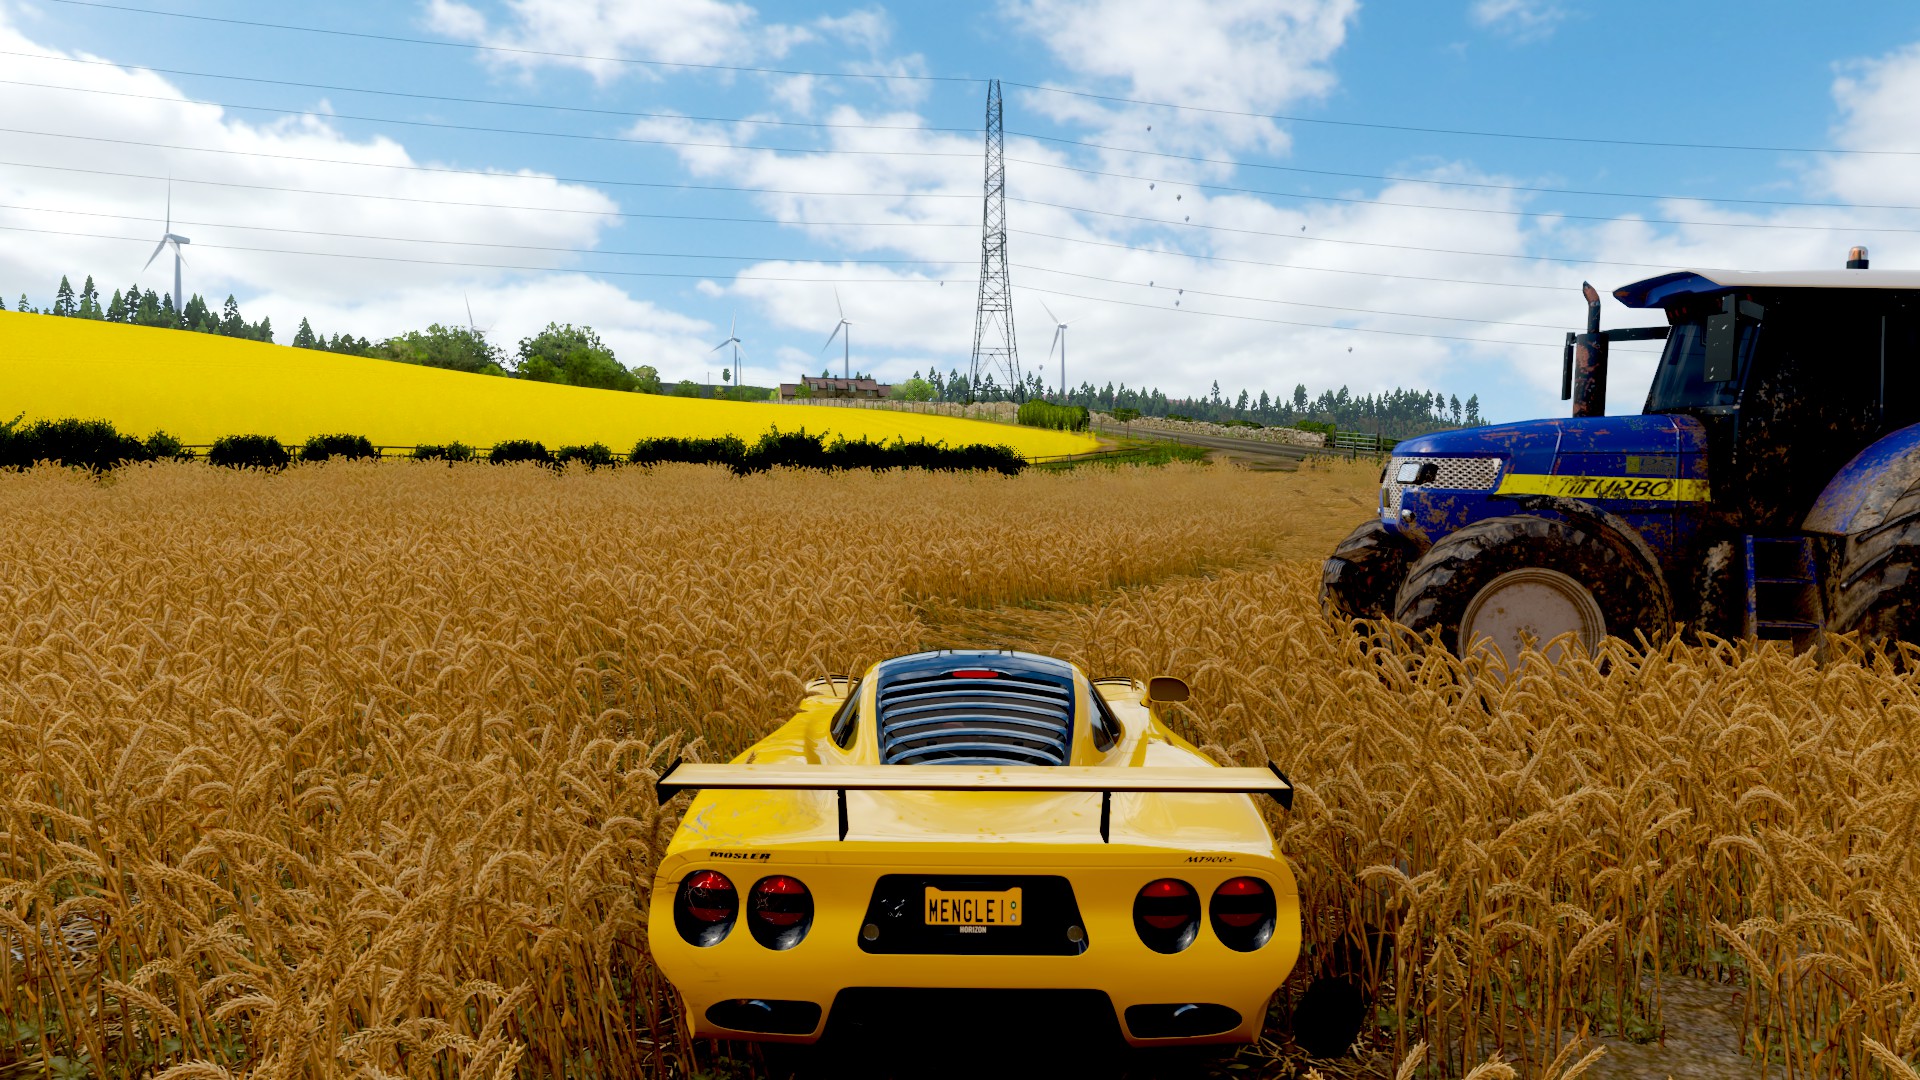 General 1920x1080 Forza Horizon 4 landscape video games clouds sky video game art field licence plates rear view windmill CGI truck vehicle PlaygroundGames British cars